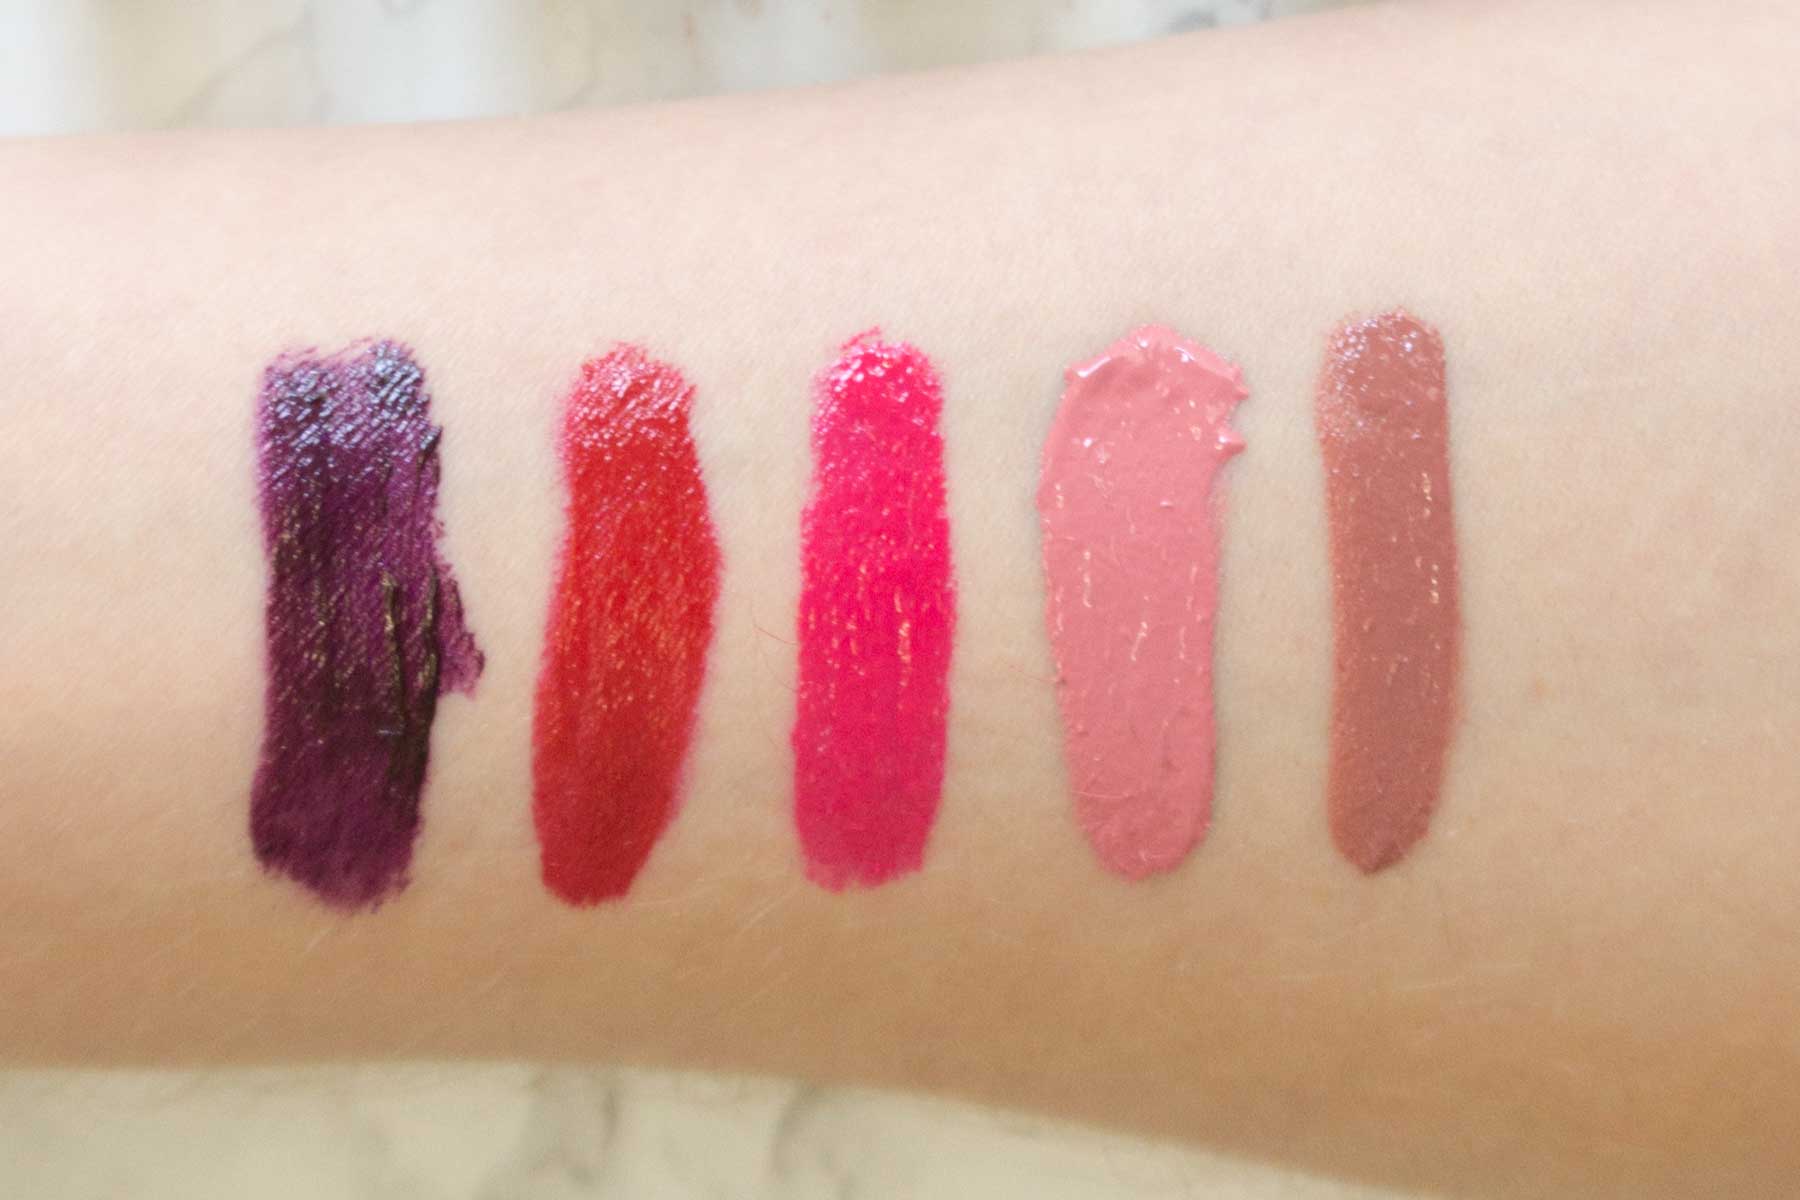 maybelline color drama swatches